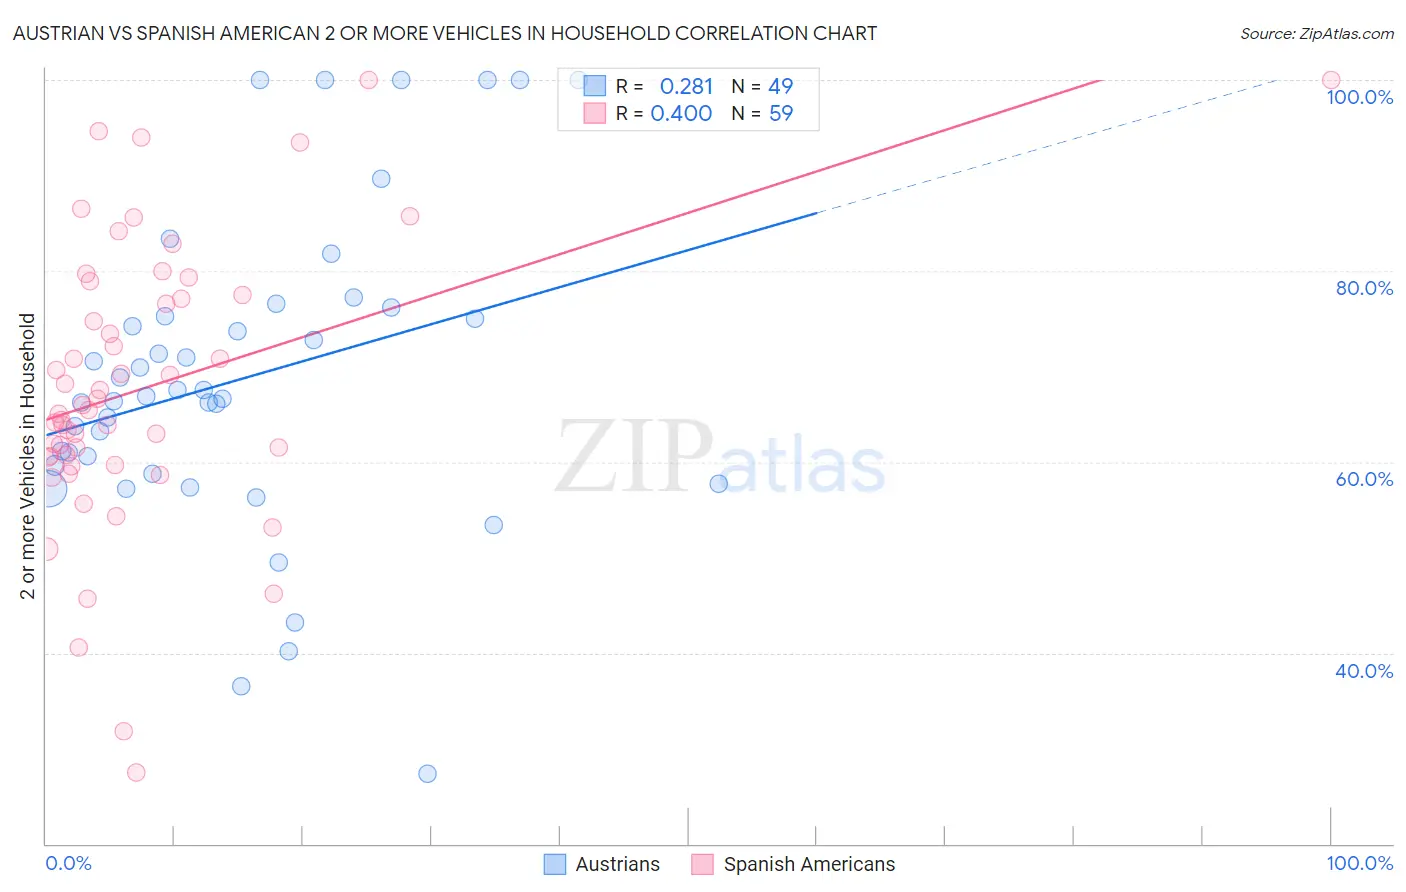 Austrian vs Spanish American 2 or more Vehicles in Household